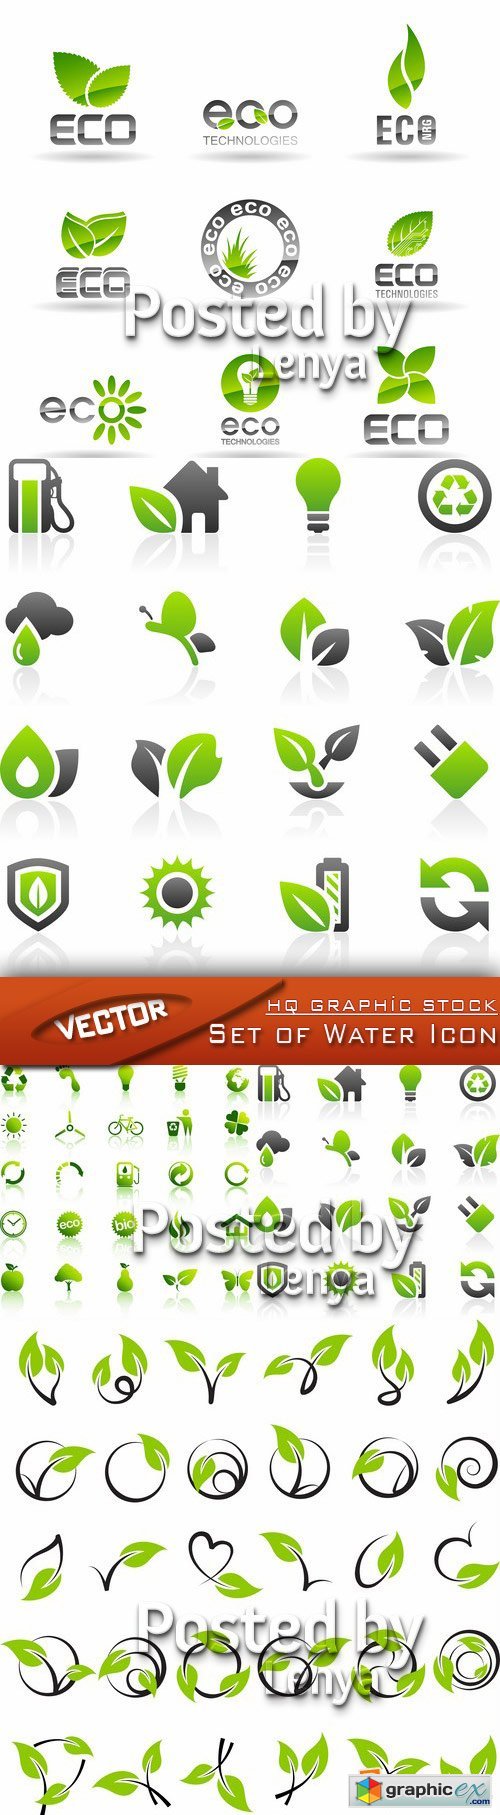 Stock Vector - Set of Water Icons